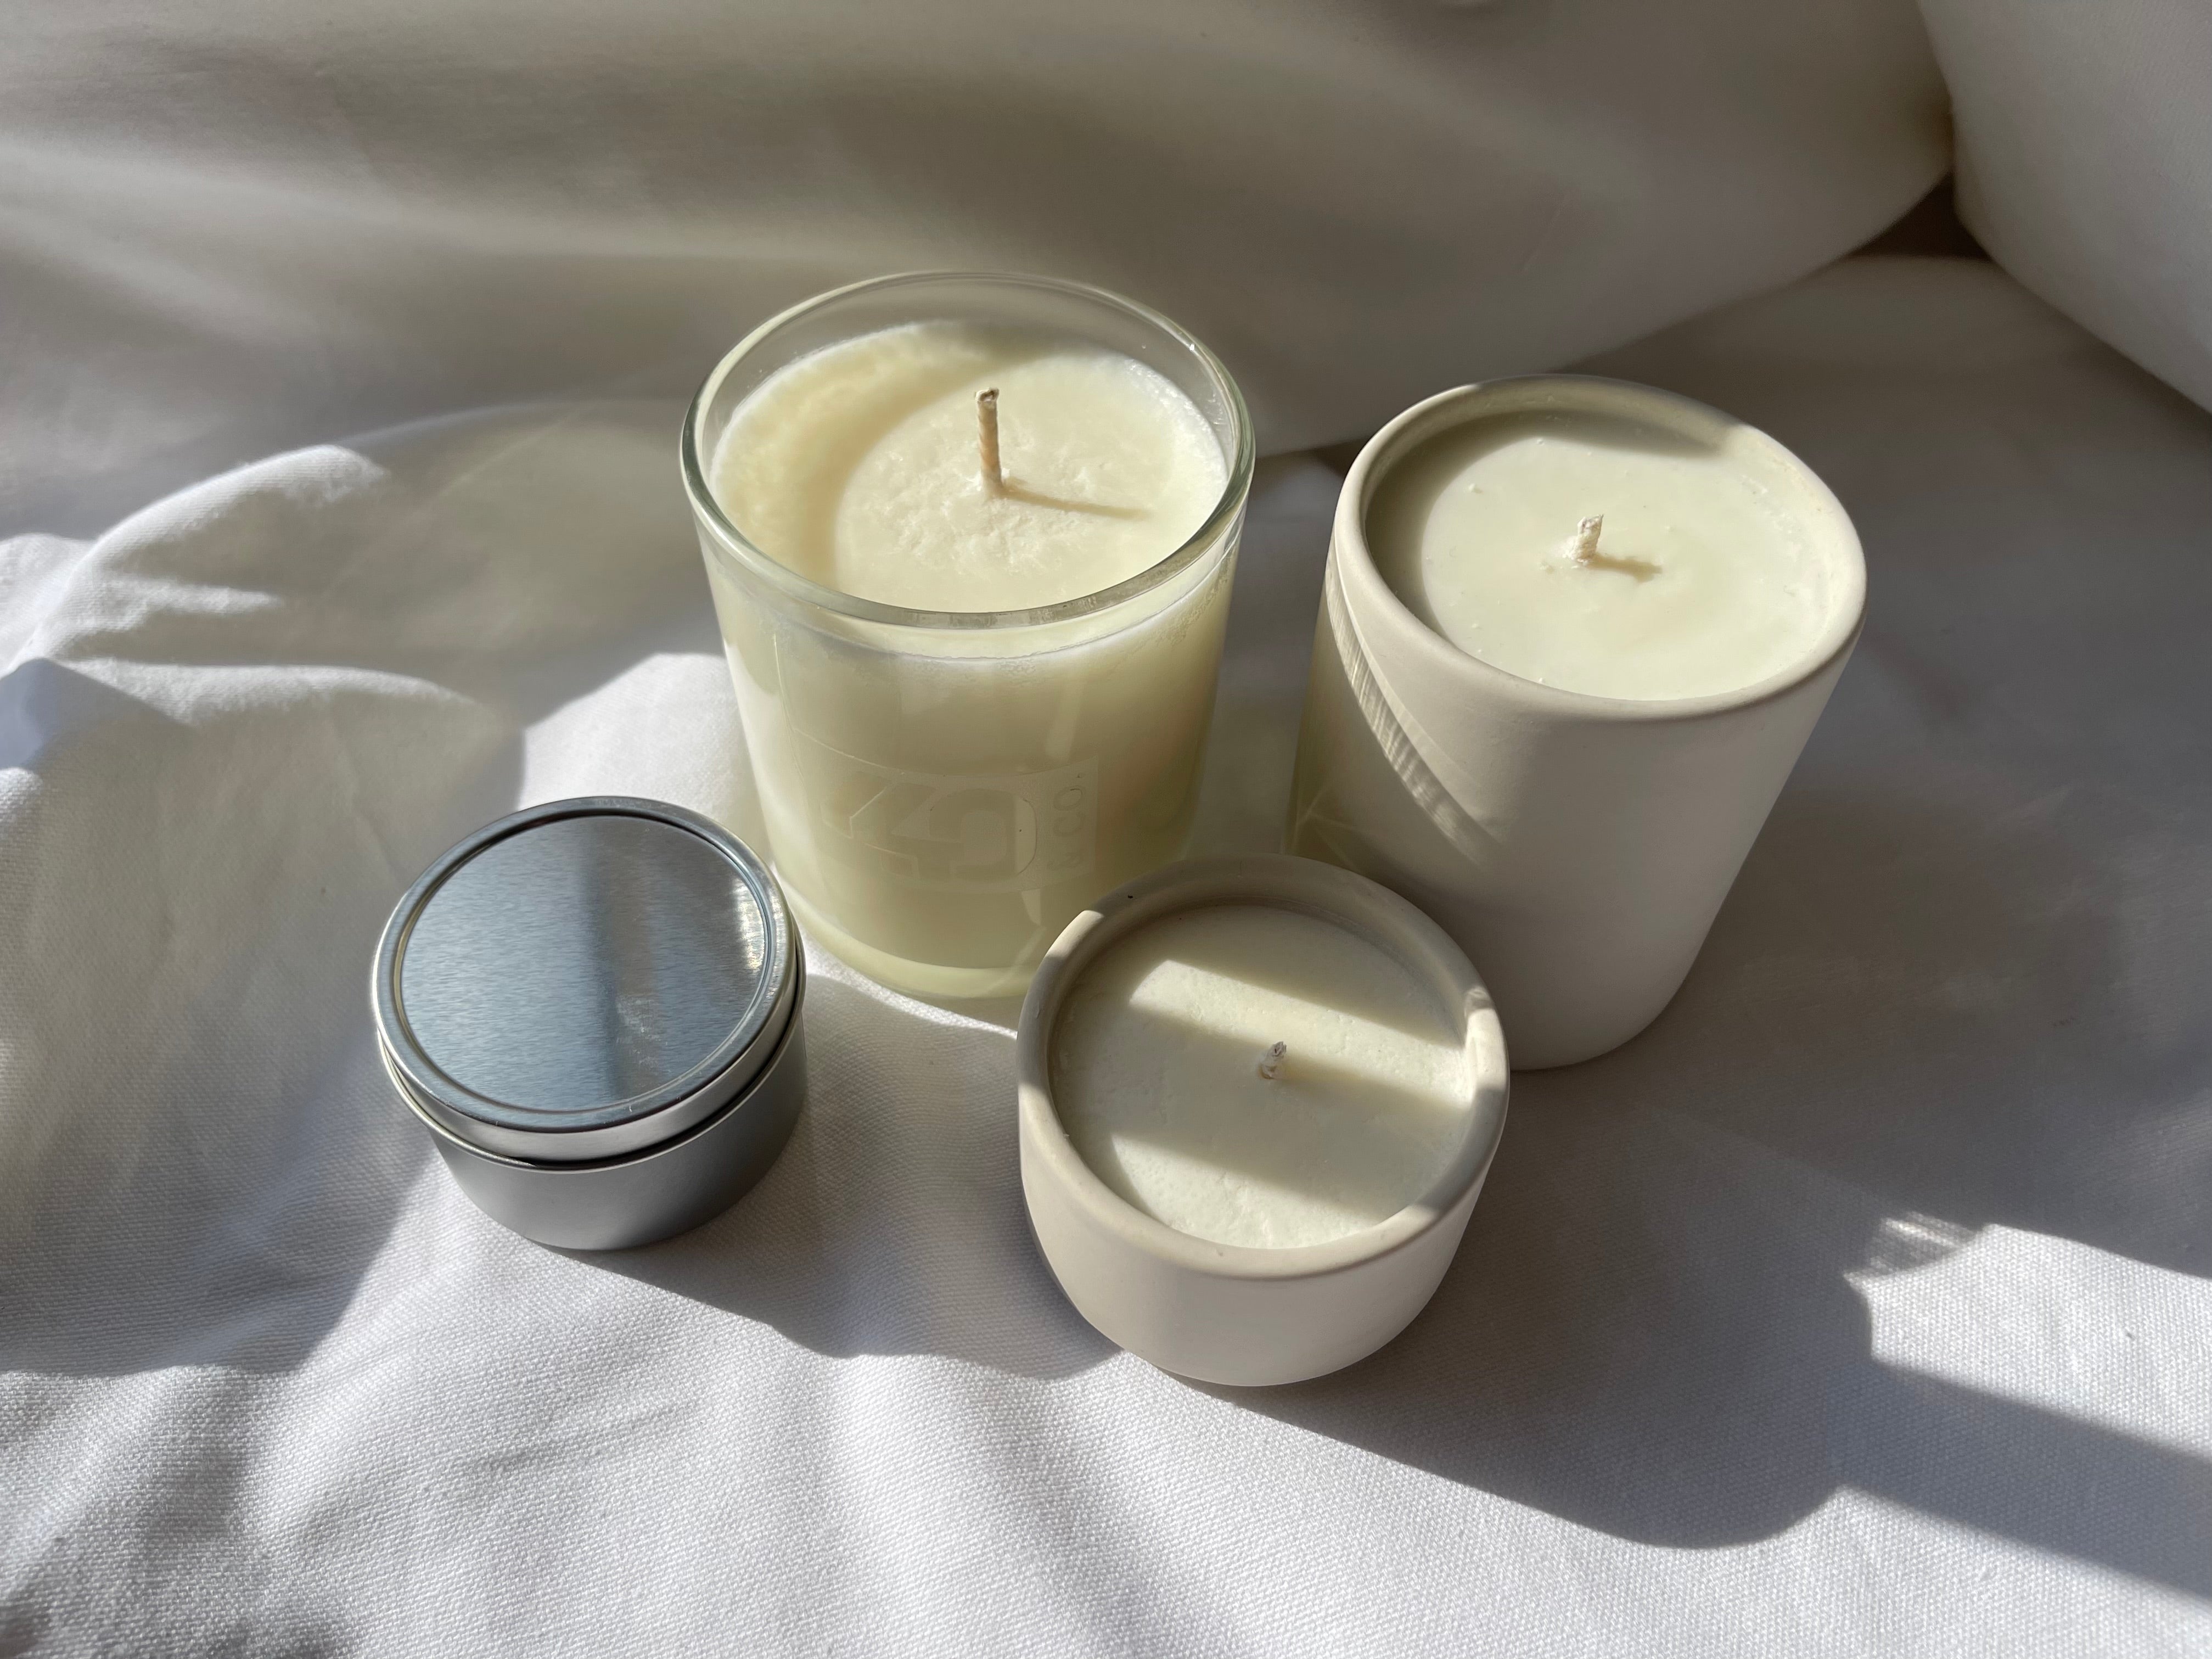 old pueblo candle | multiple options